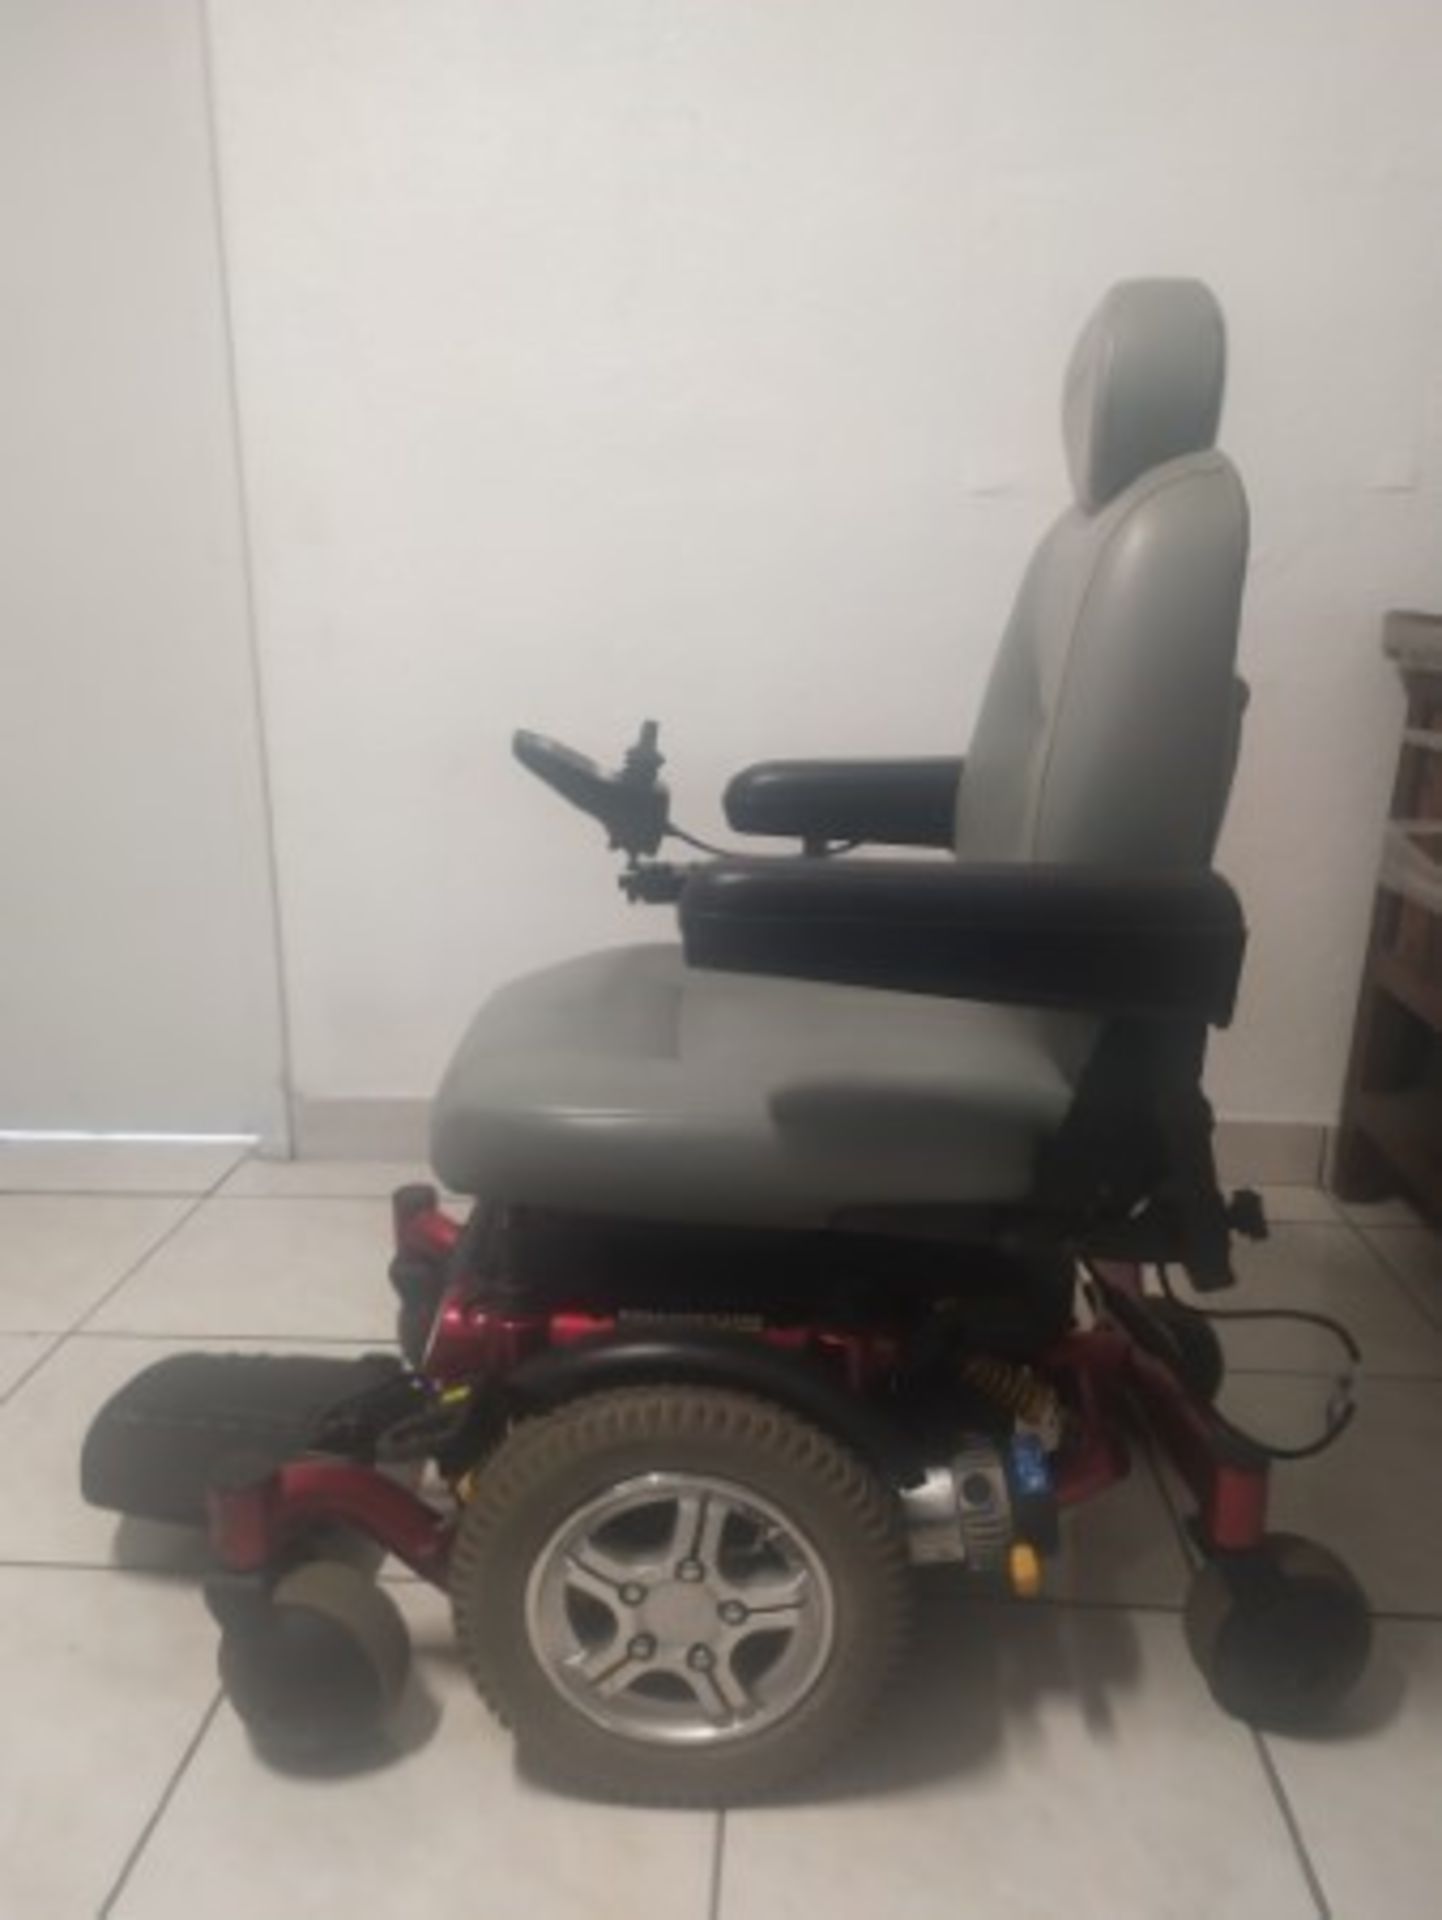 2013 QUANTUM 6000Z 6-WHEEL POWER CHAIR WITH JOYSTICK CONTROL - RED - 300LB CAPACITY - SERIAL No. 231